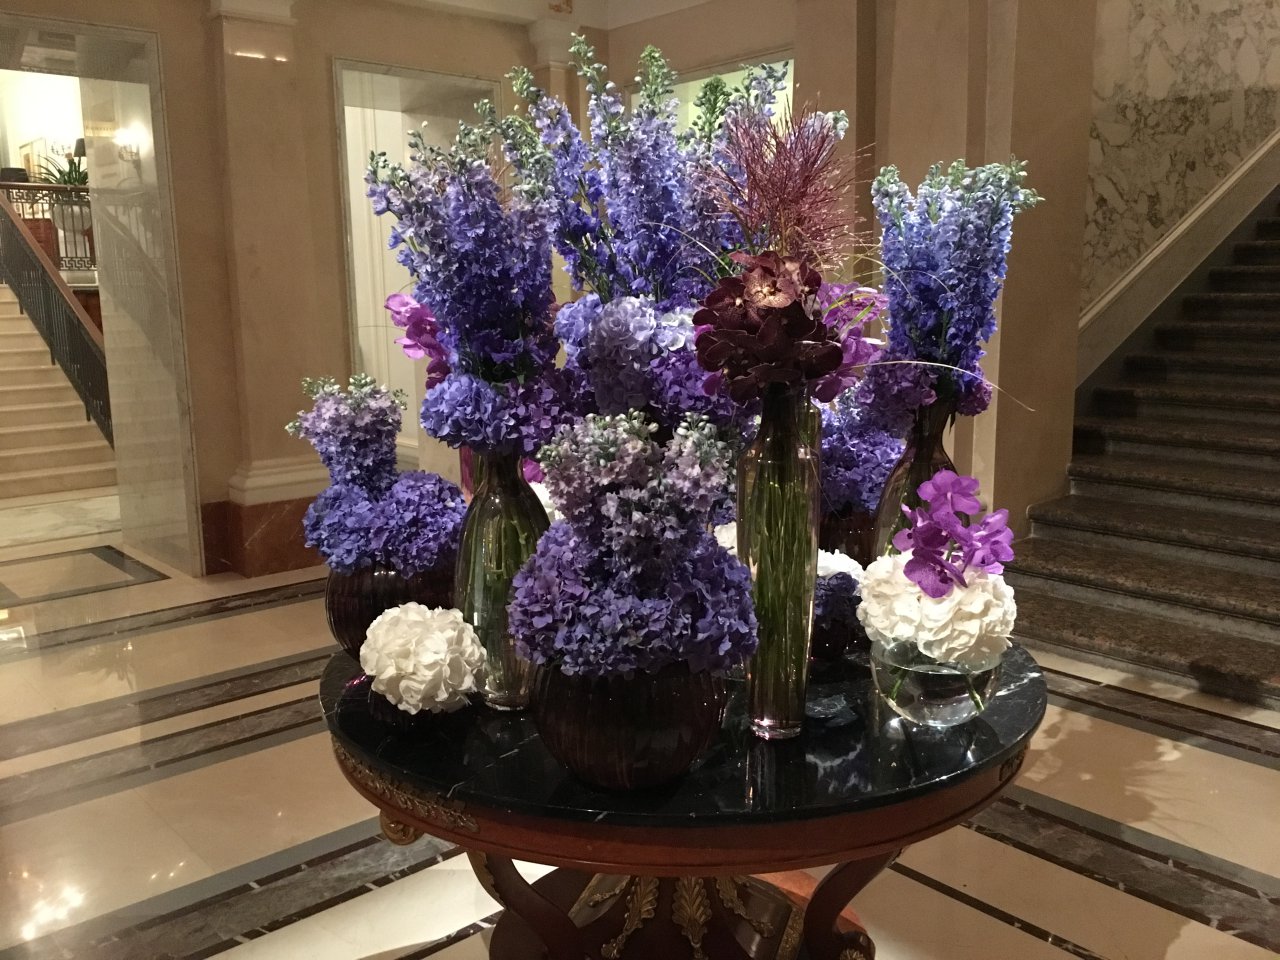 Guess the Hotel-Purple Lobby Flowers